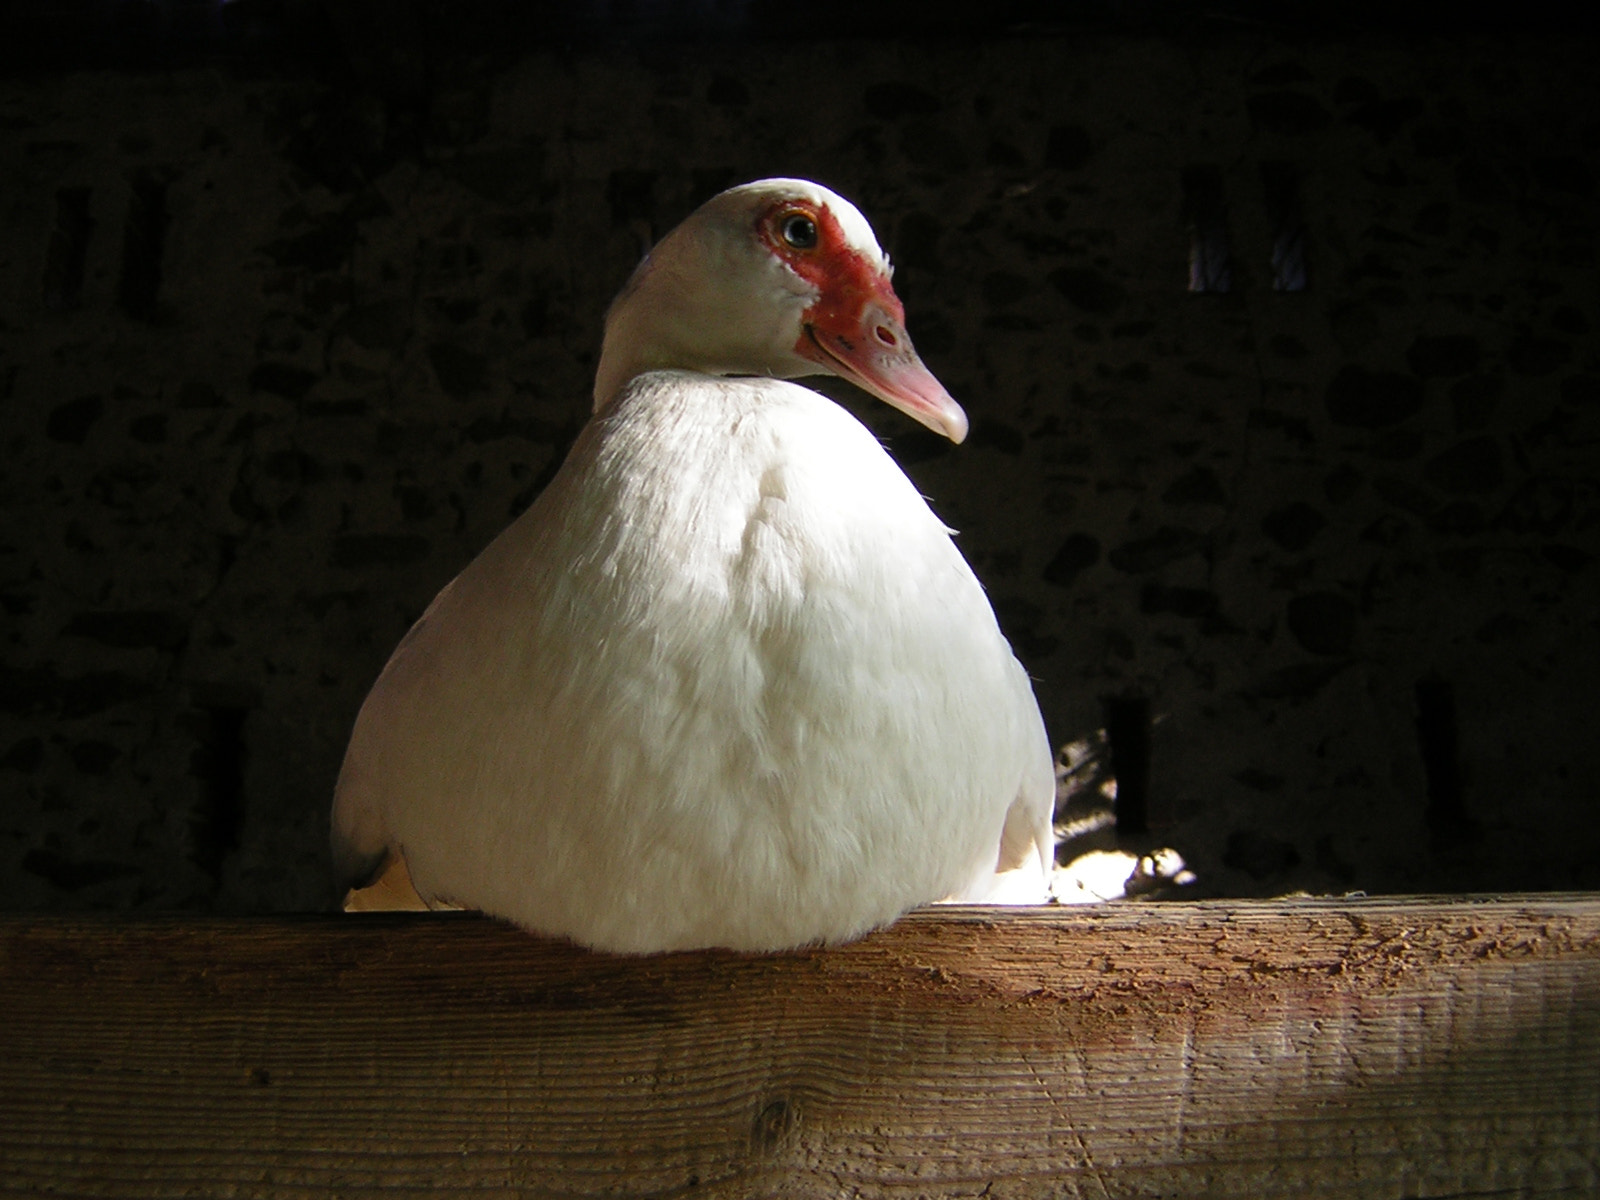 Nikon E2200 sample photo. My beloved queen duck photography